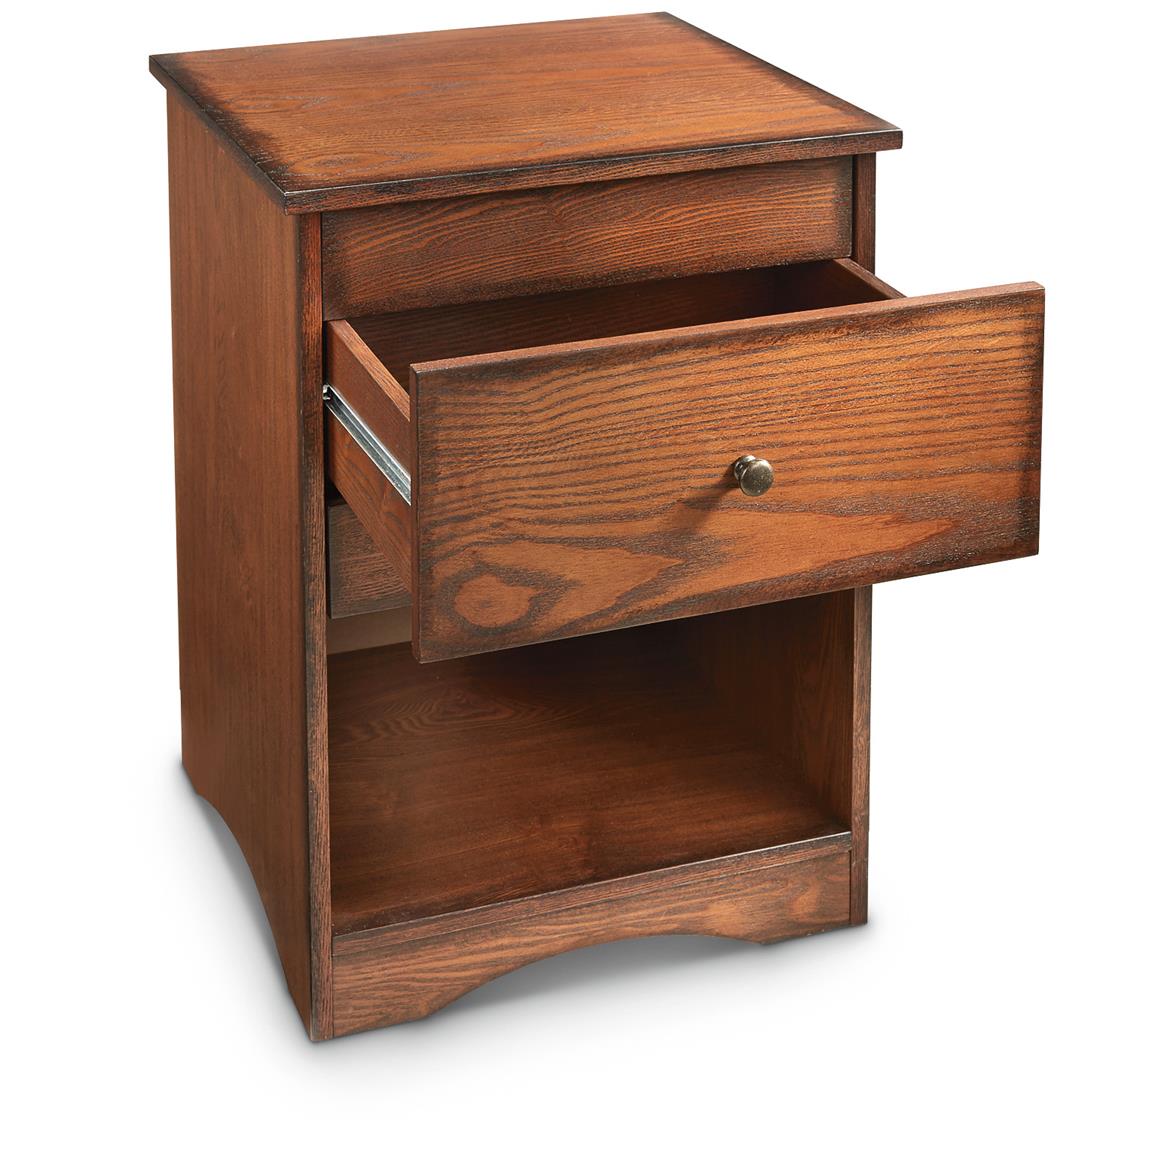 castlecreek gun concealment end table living room essentials storage accent middle drawer pulls out without seeing other two compartments wide side stacking coffee tables butler